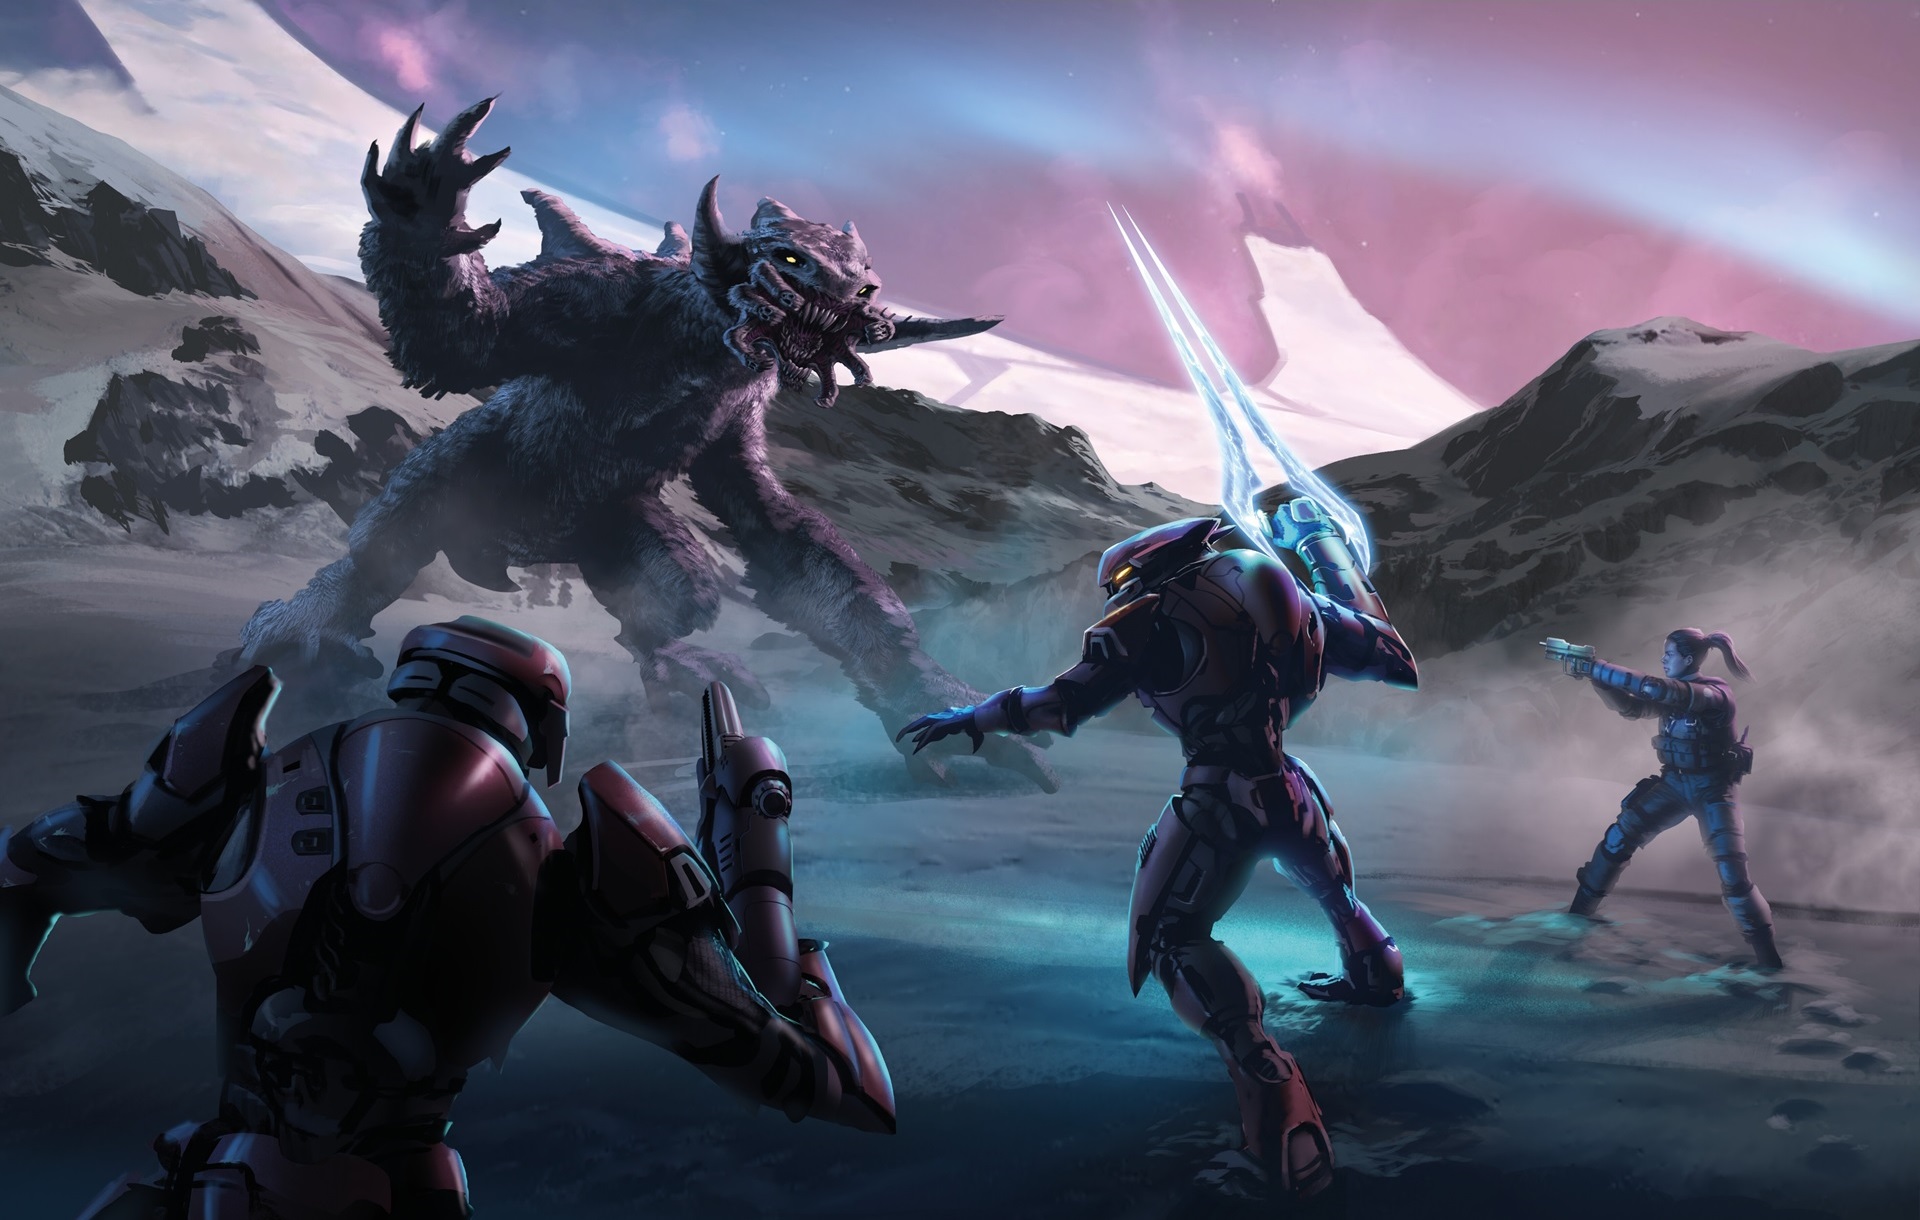 Halo Mythos artwork by Isaac Hannaford depicting a scene from Halo: Hunters in the Dark where Olympia Vale and Usze 'Taham battle a chaefka